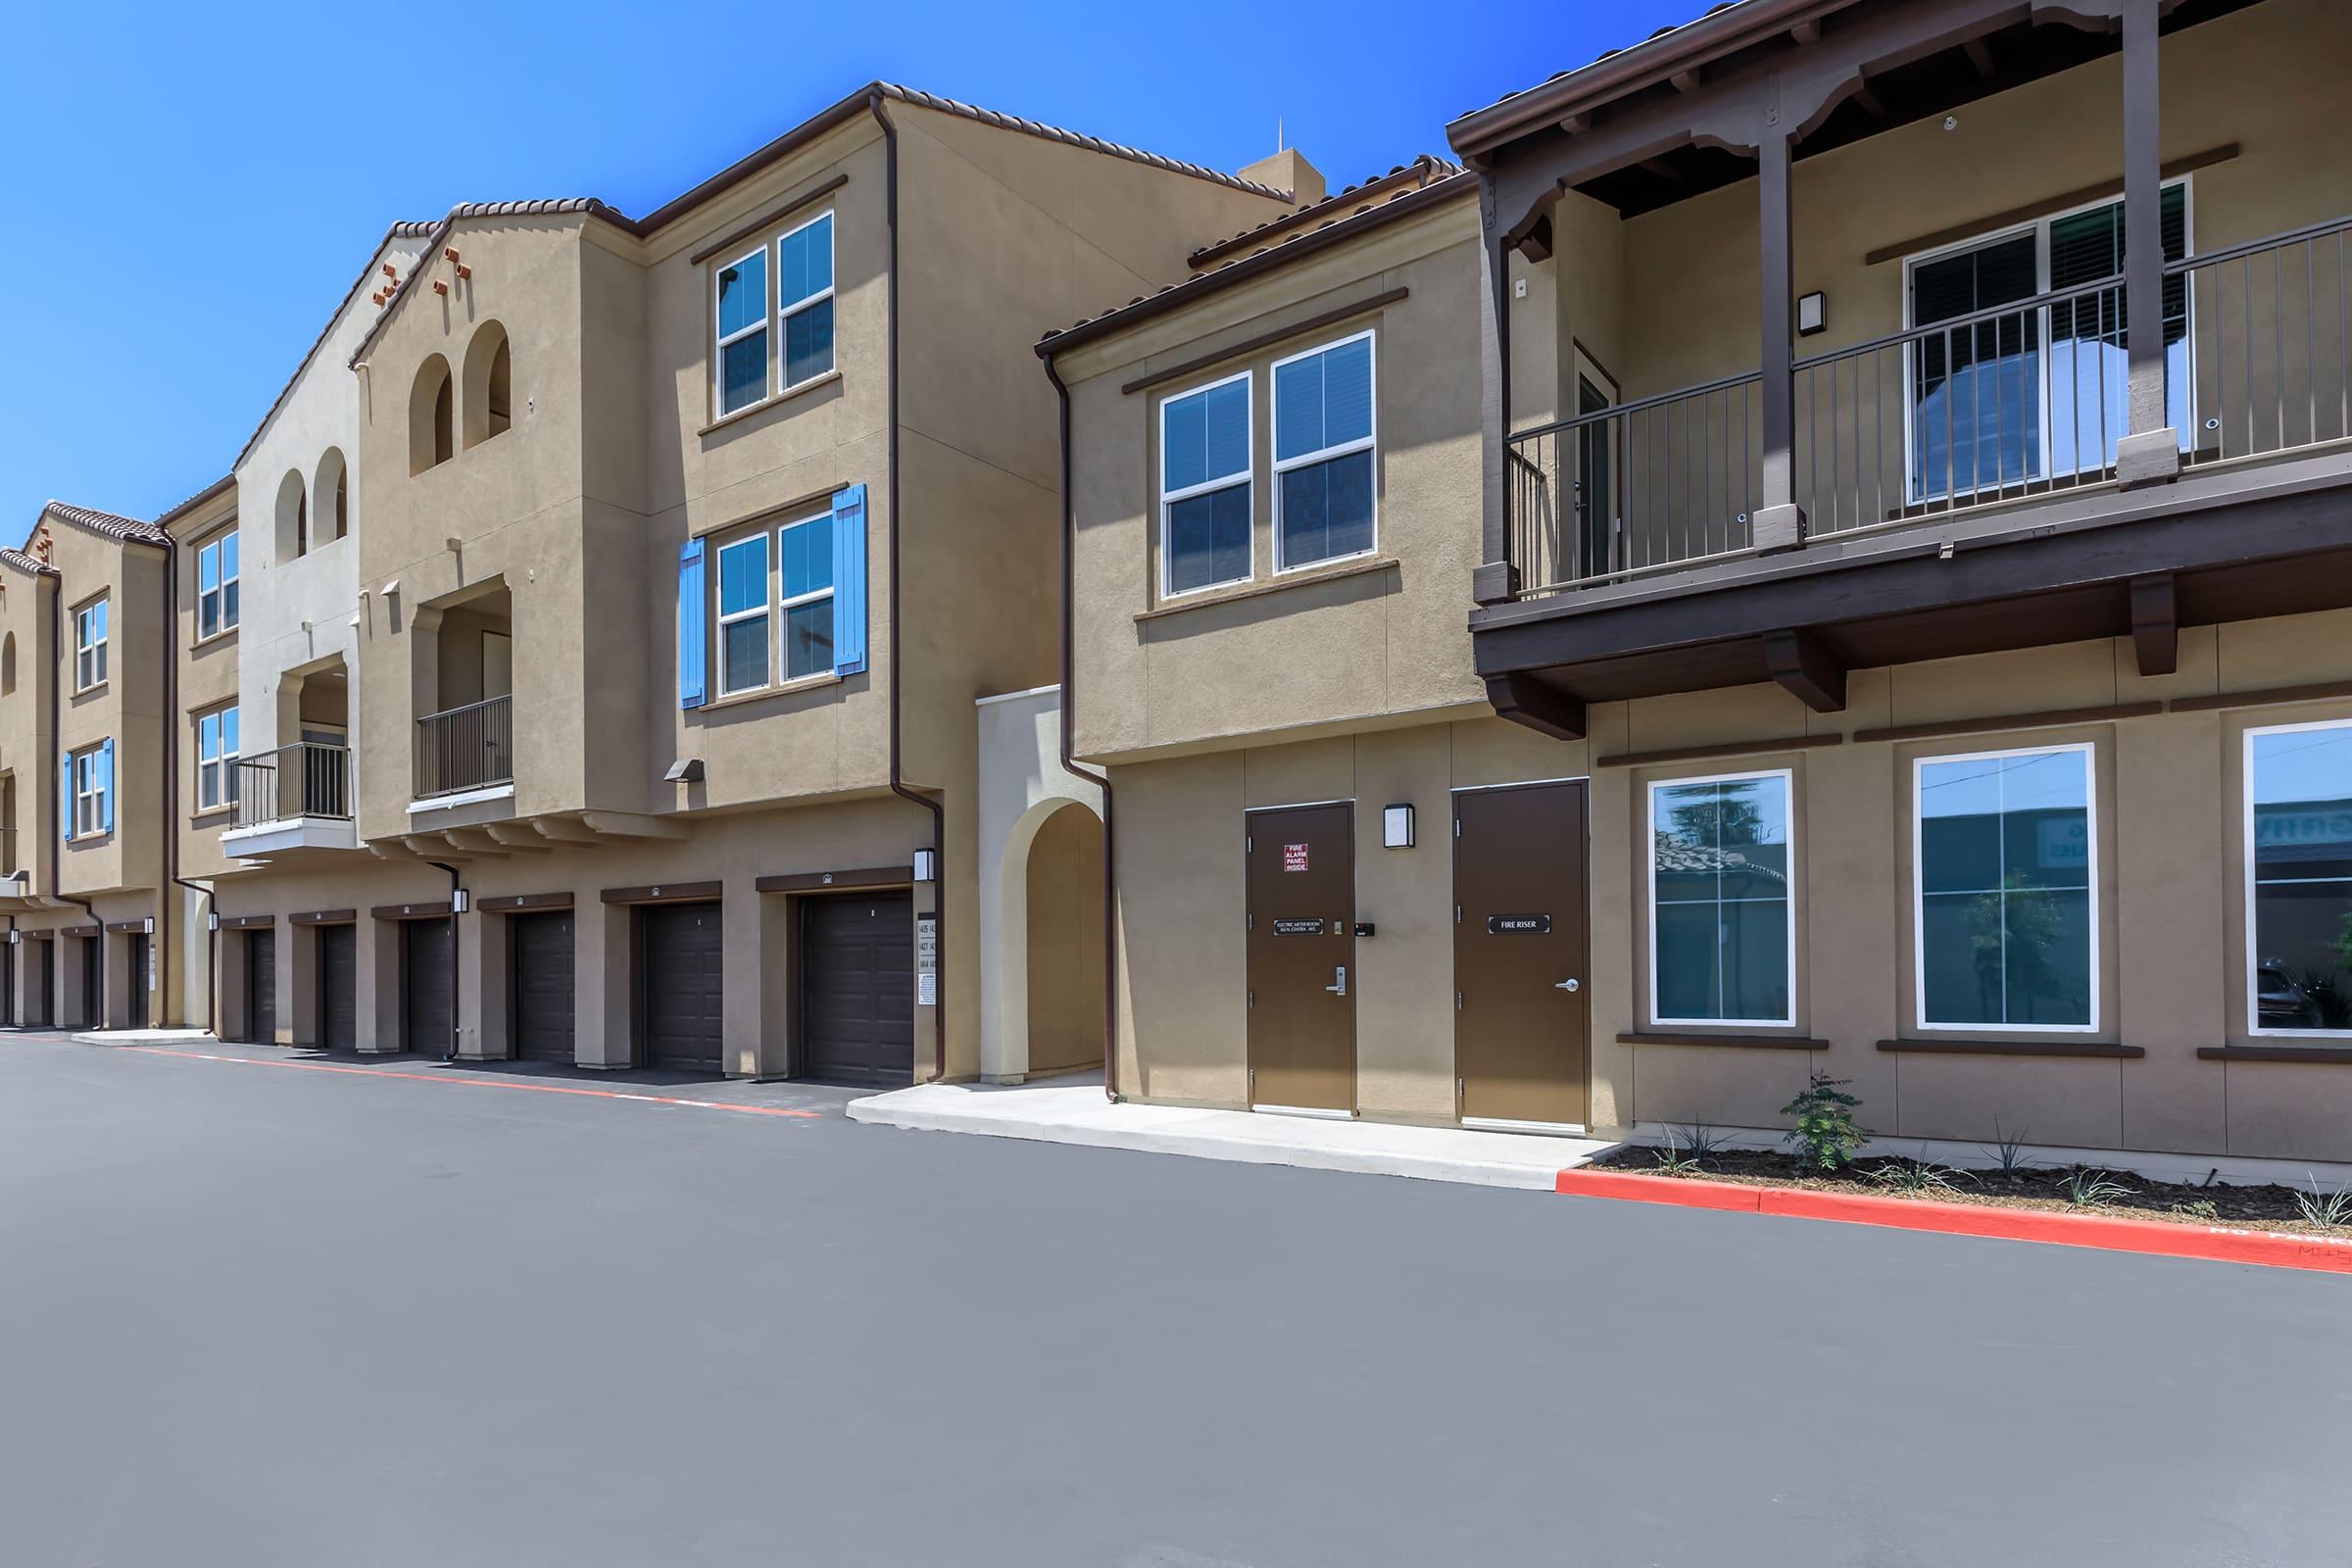 Rancho Monte Vista Luxury Apartment Homes community buildings with attached garages